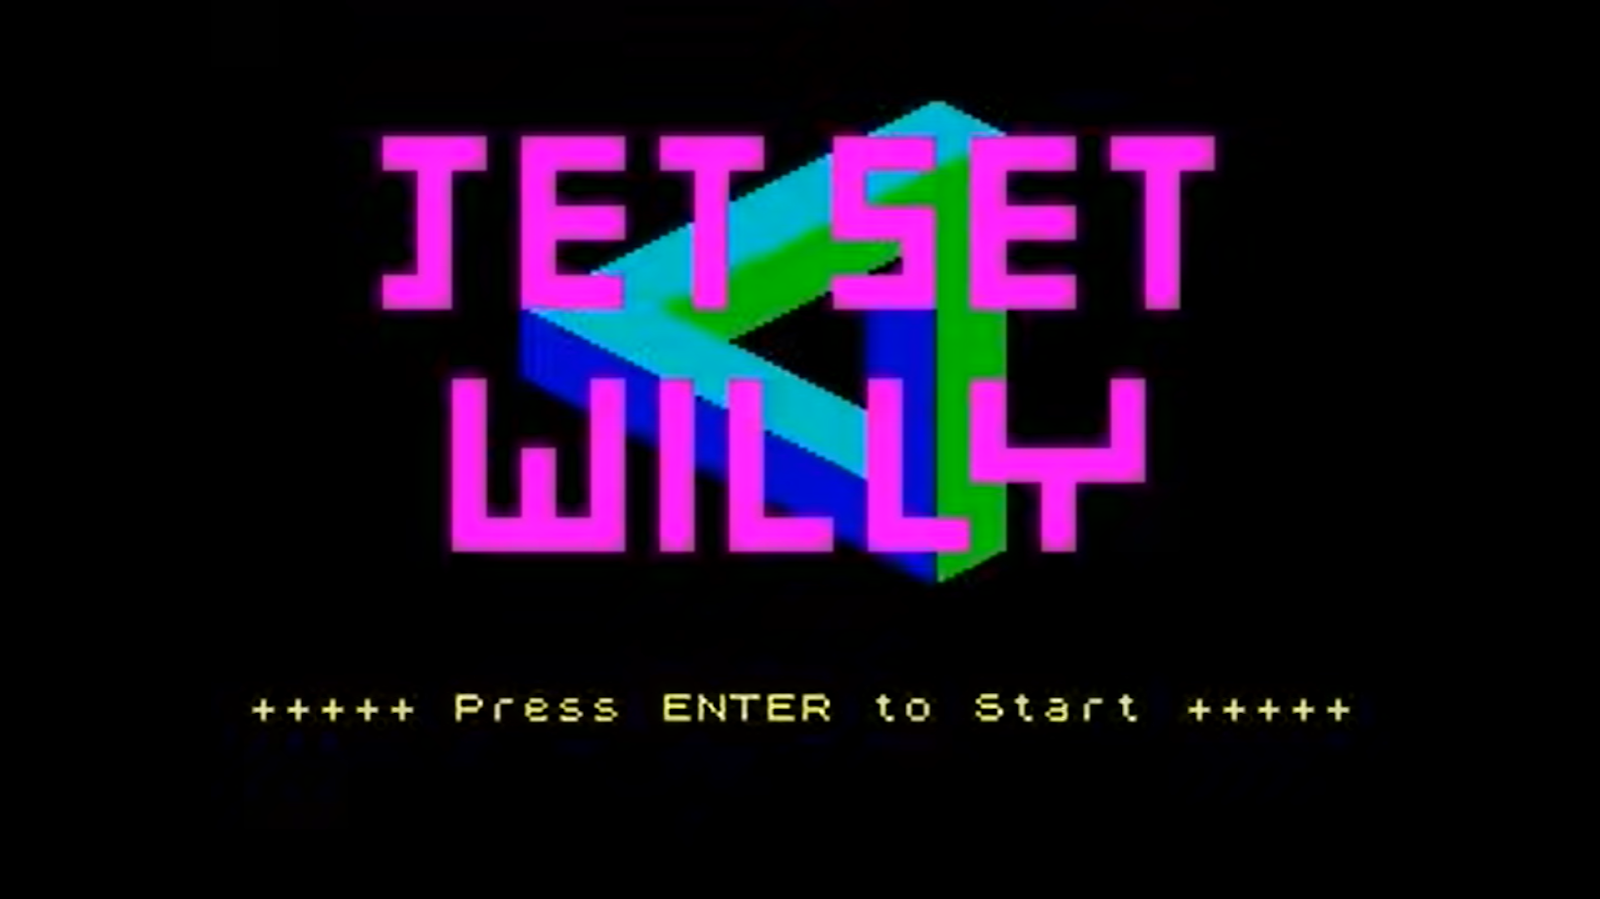 Title screen of the classic video game "Jet Set Willy" with neon colors